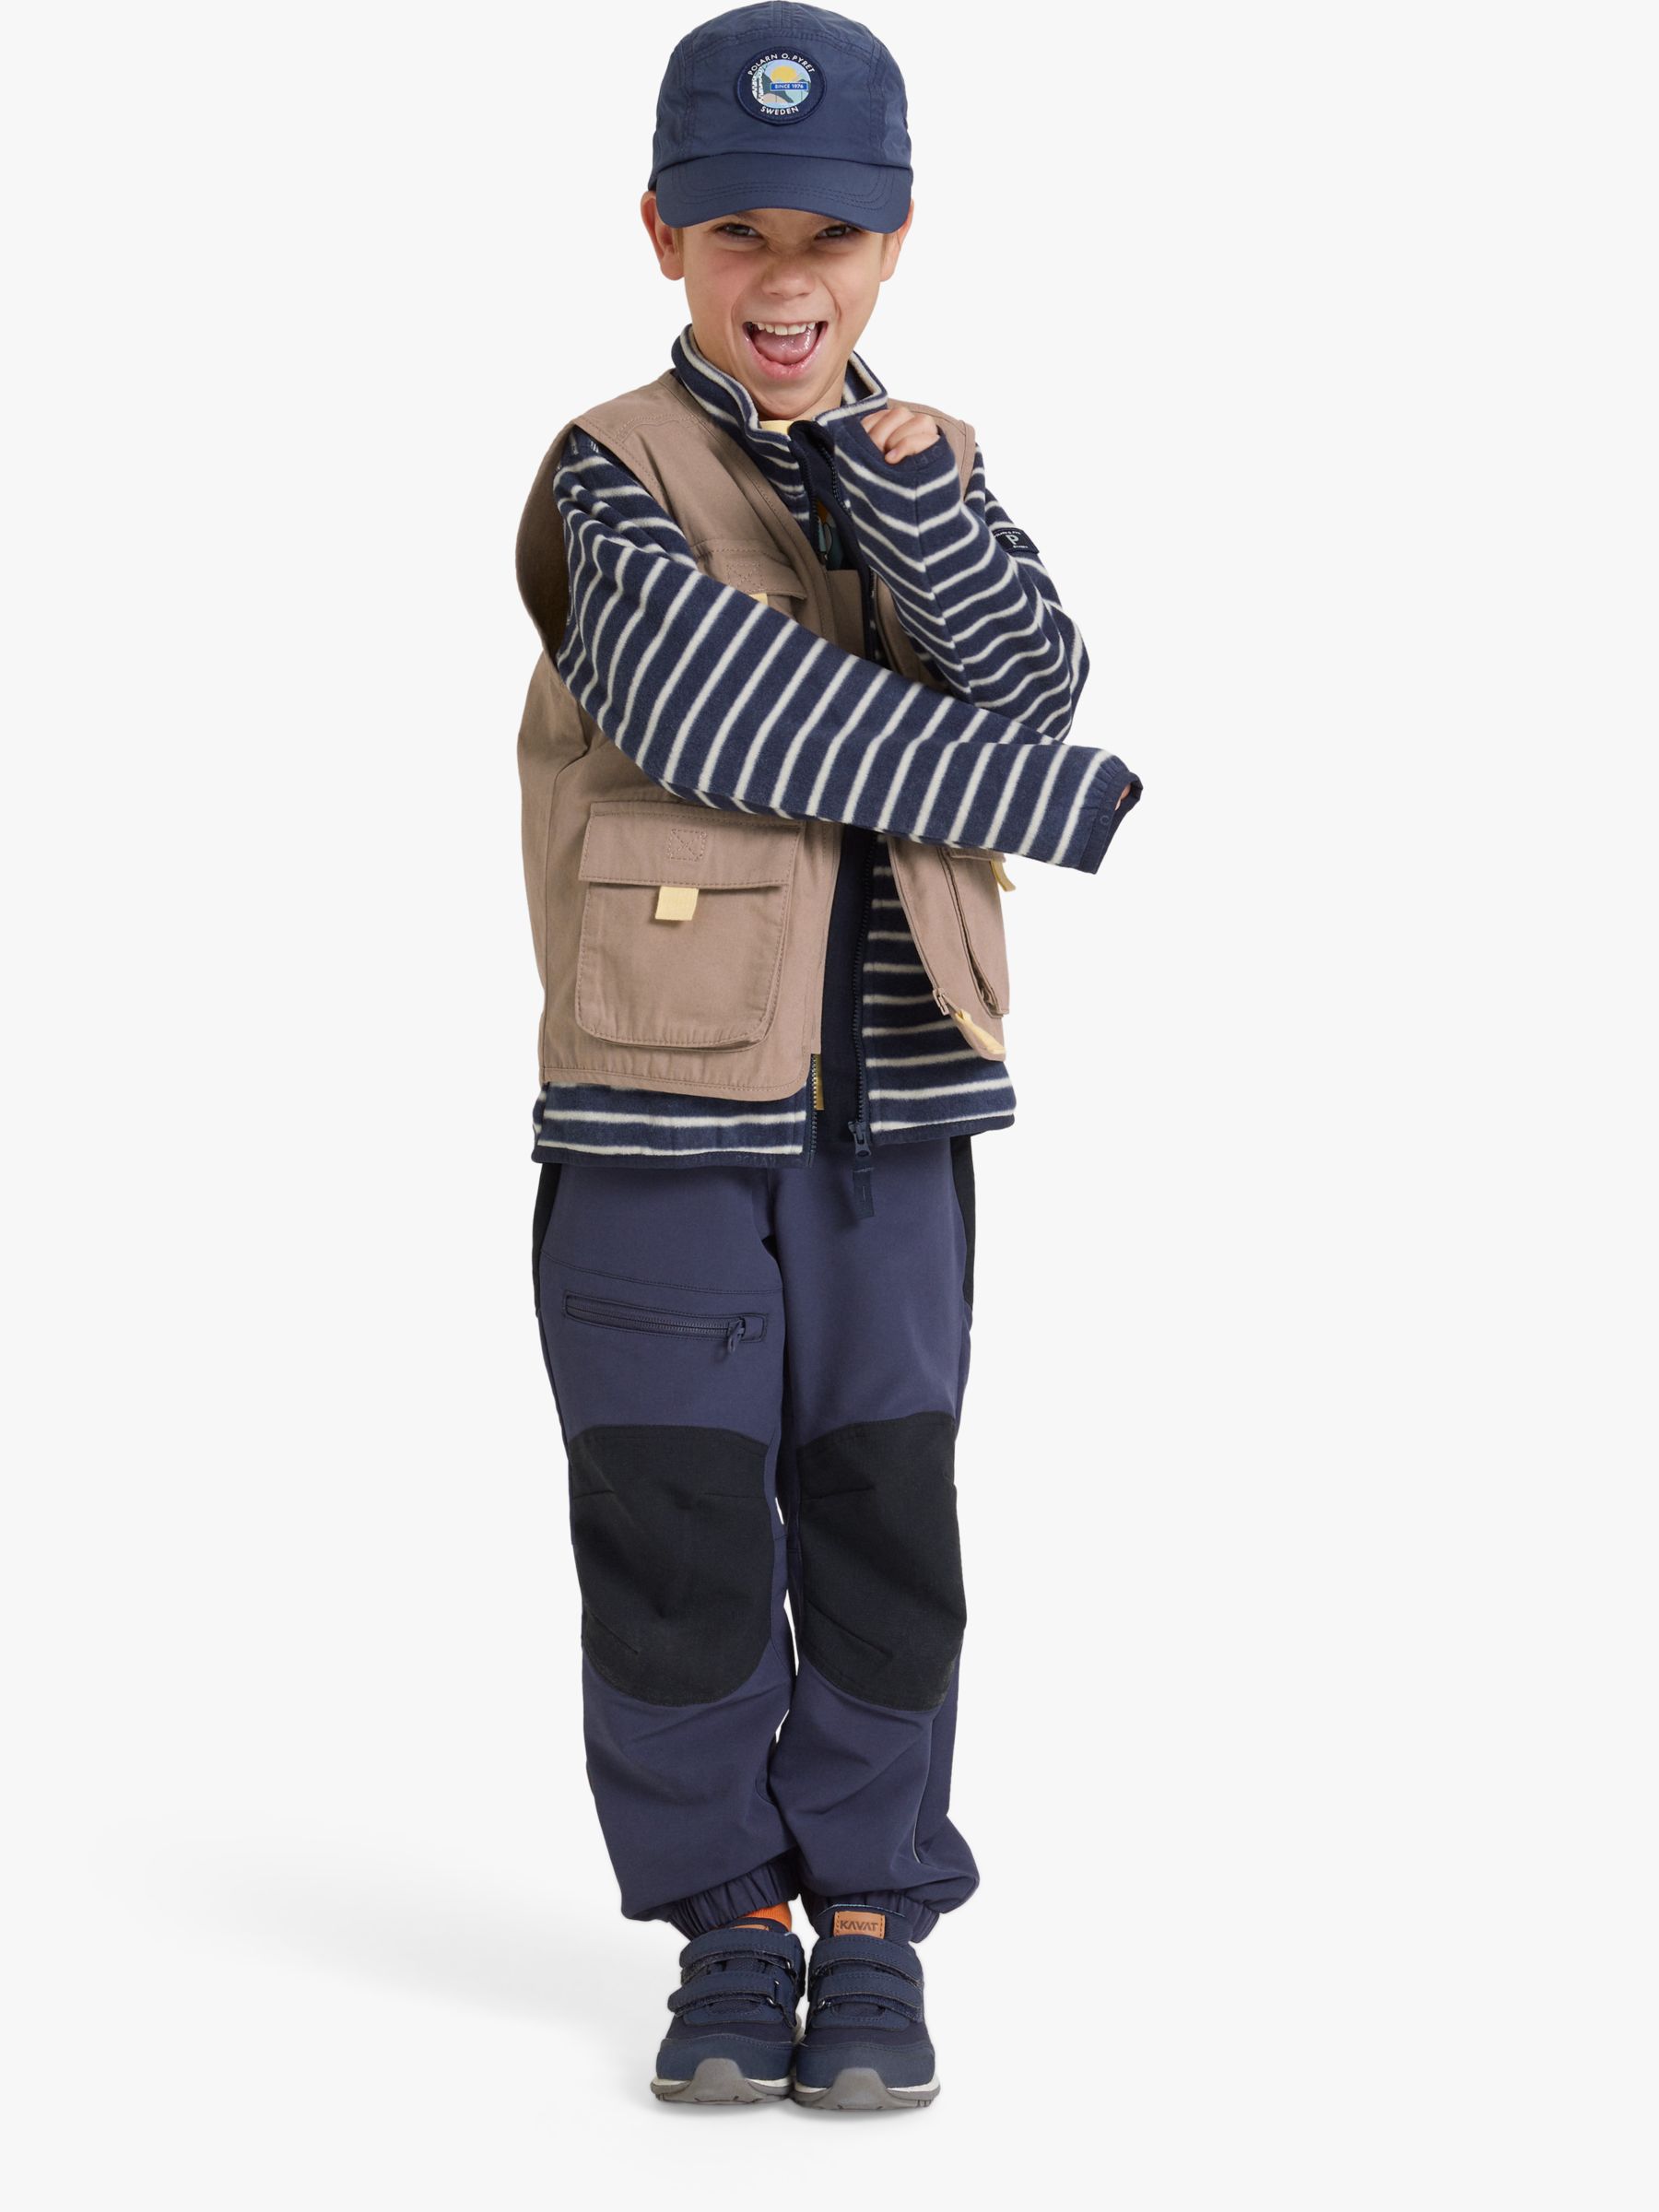 Buy Polarn O. Pyret Kids' Recycled Water Resistant Outerwear Trousers, Blue Online at johnlewis.com